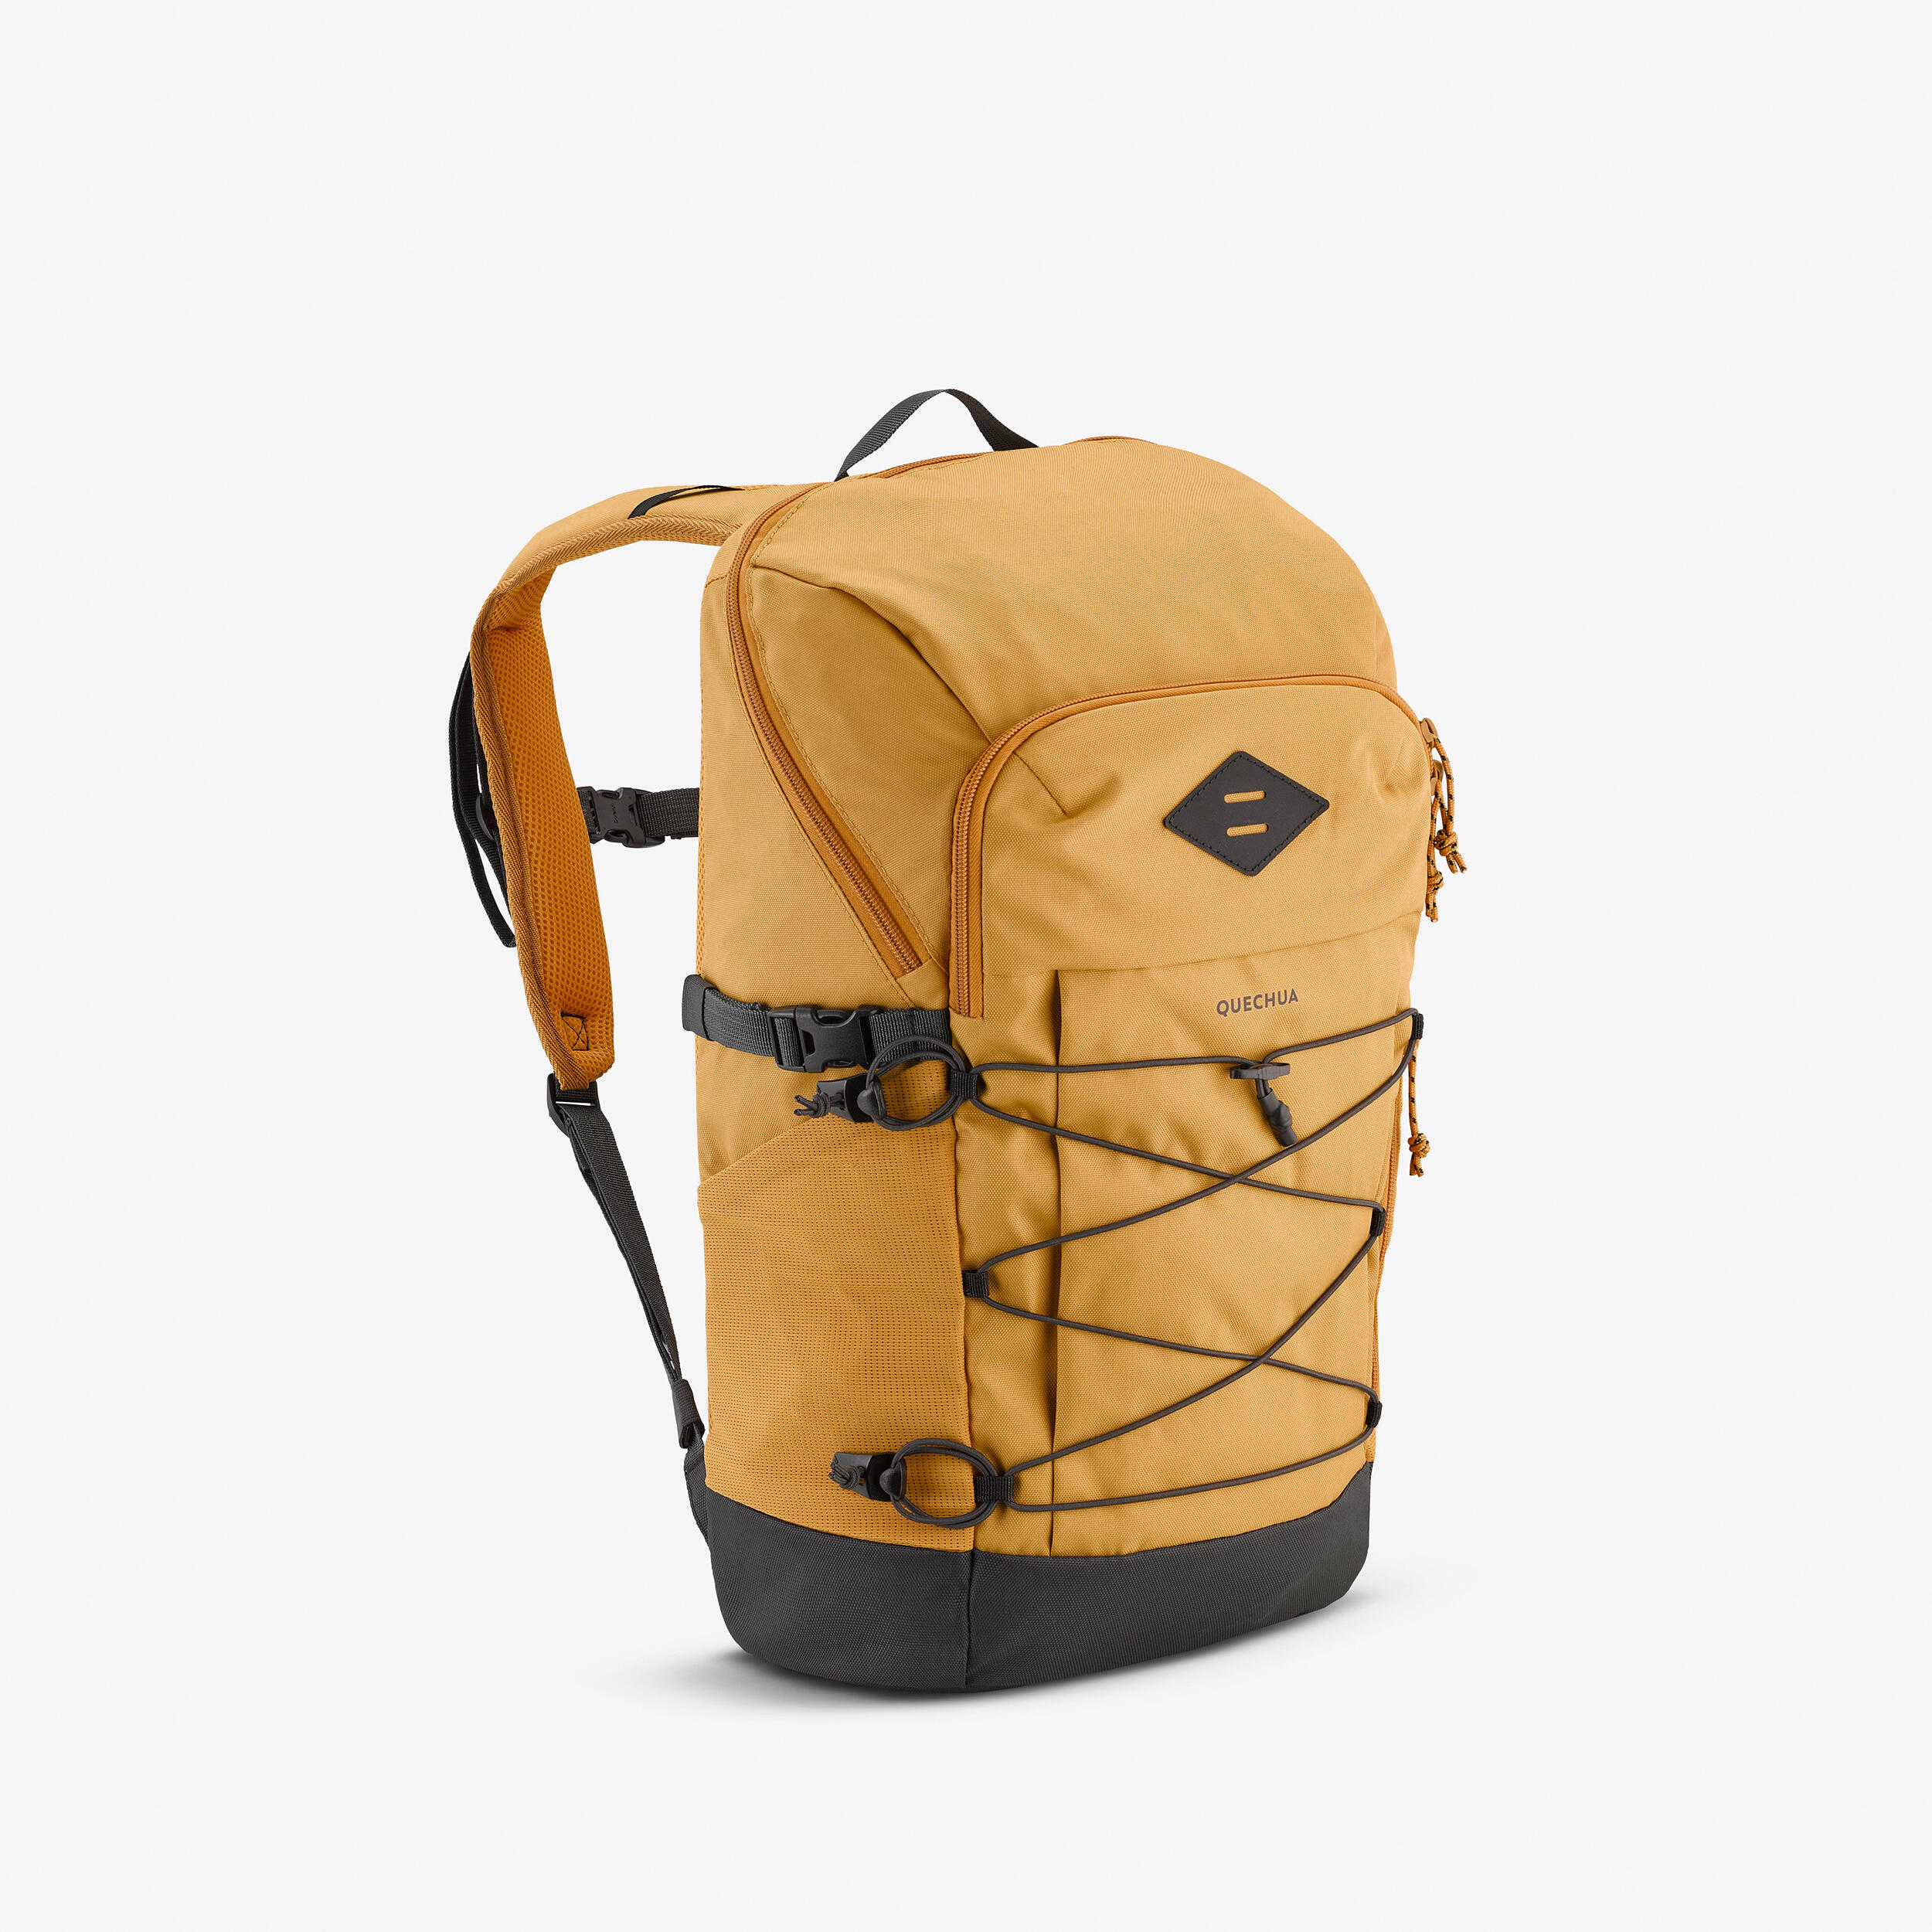 Quechua Hiking Backpack 20 L - Nh Arpenaz 500